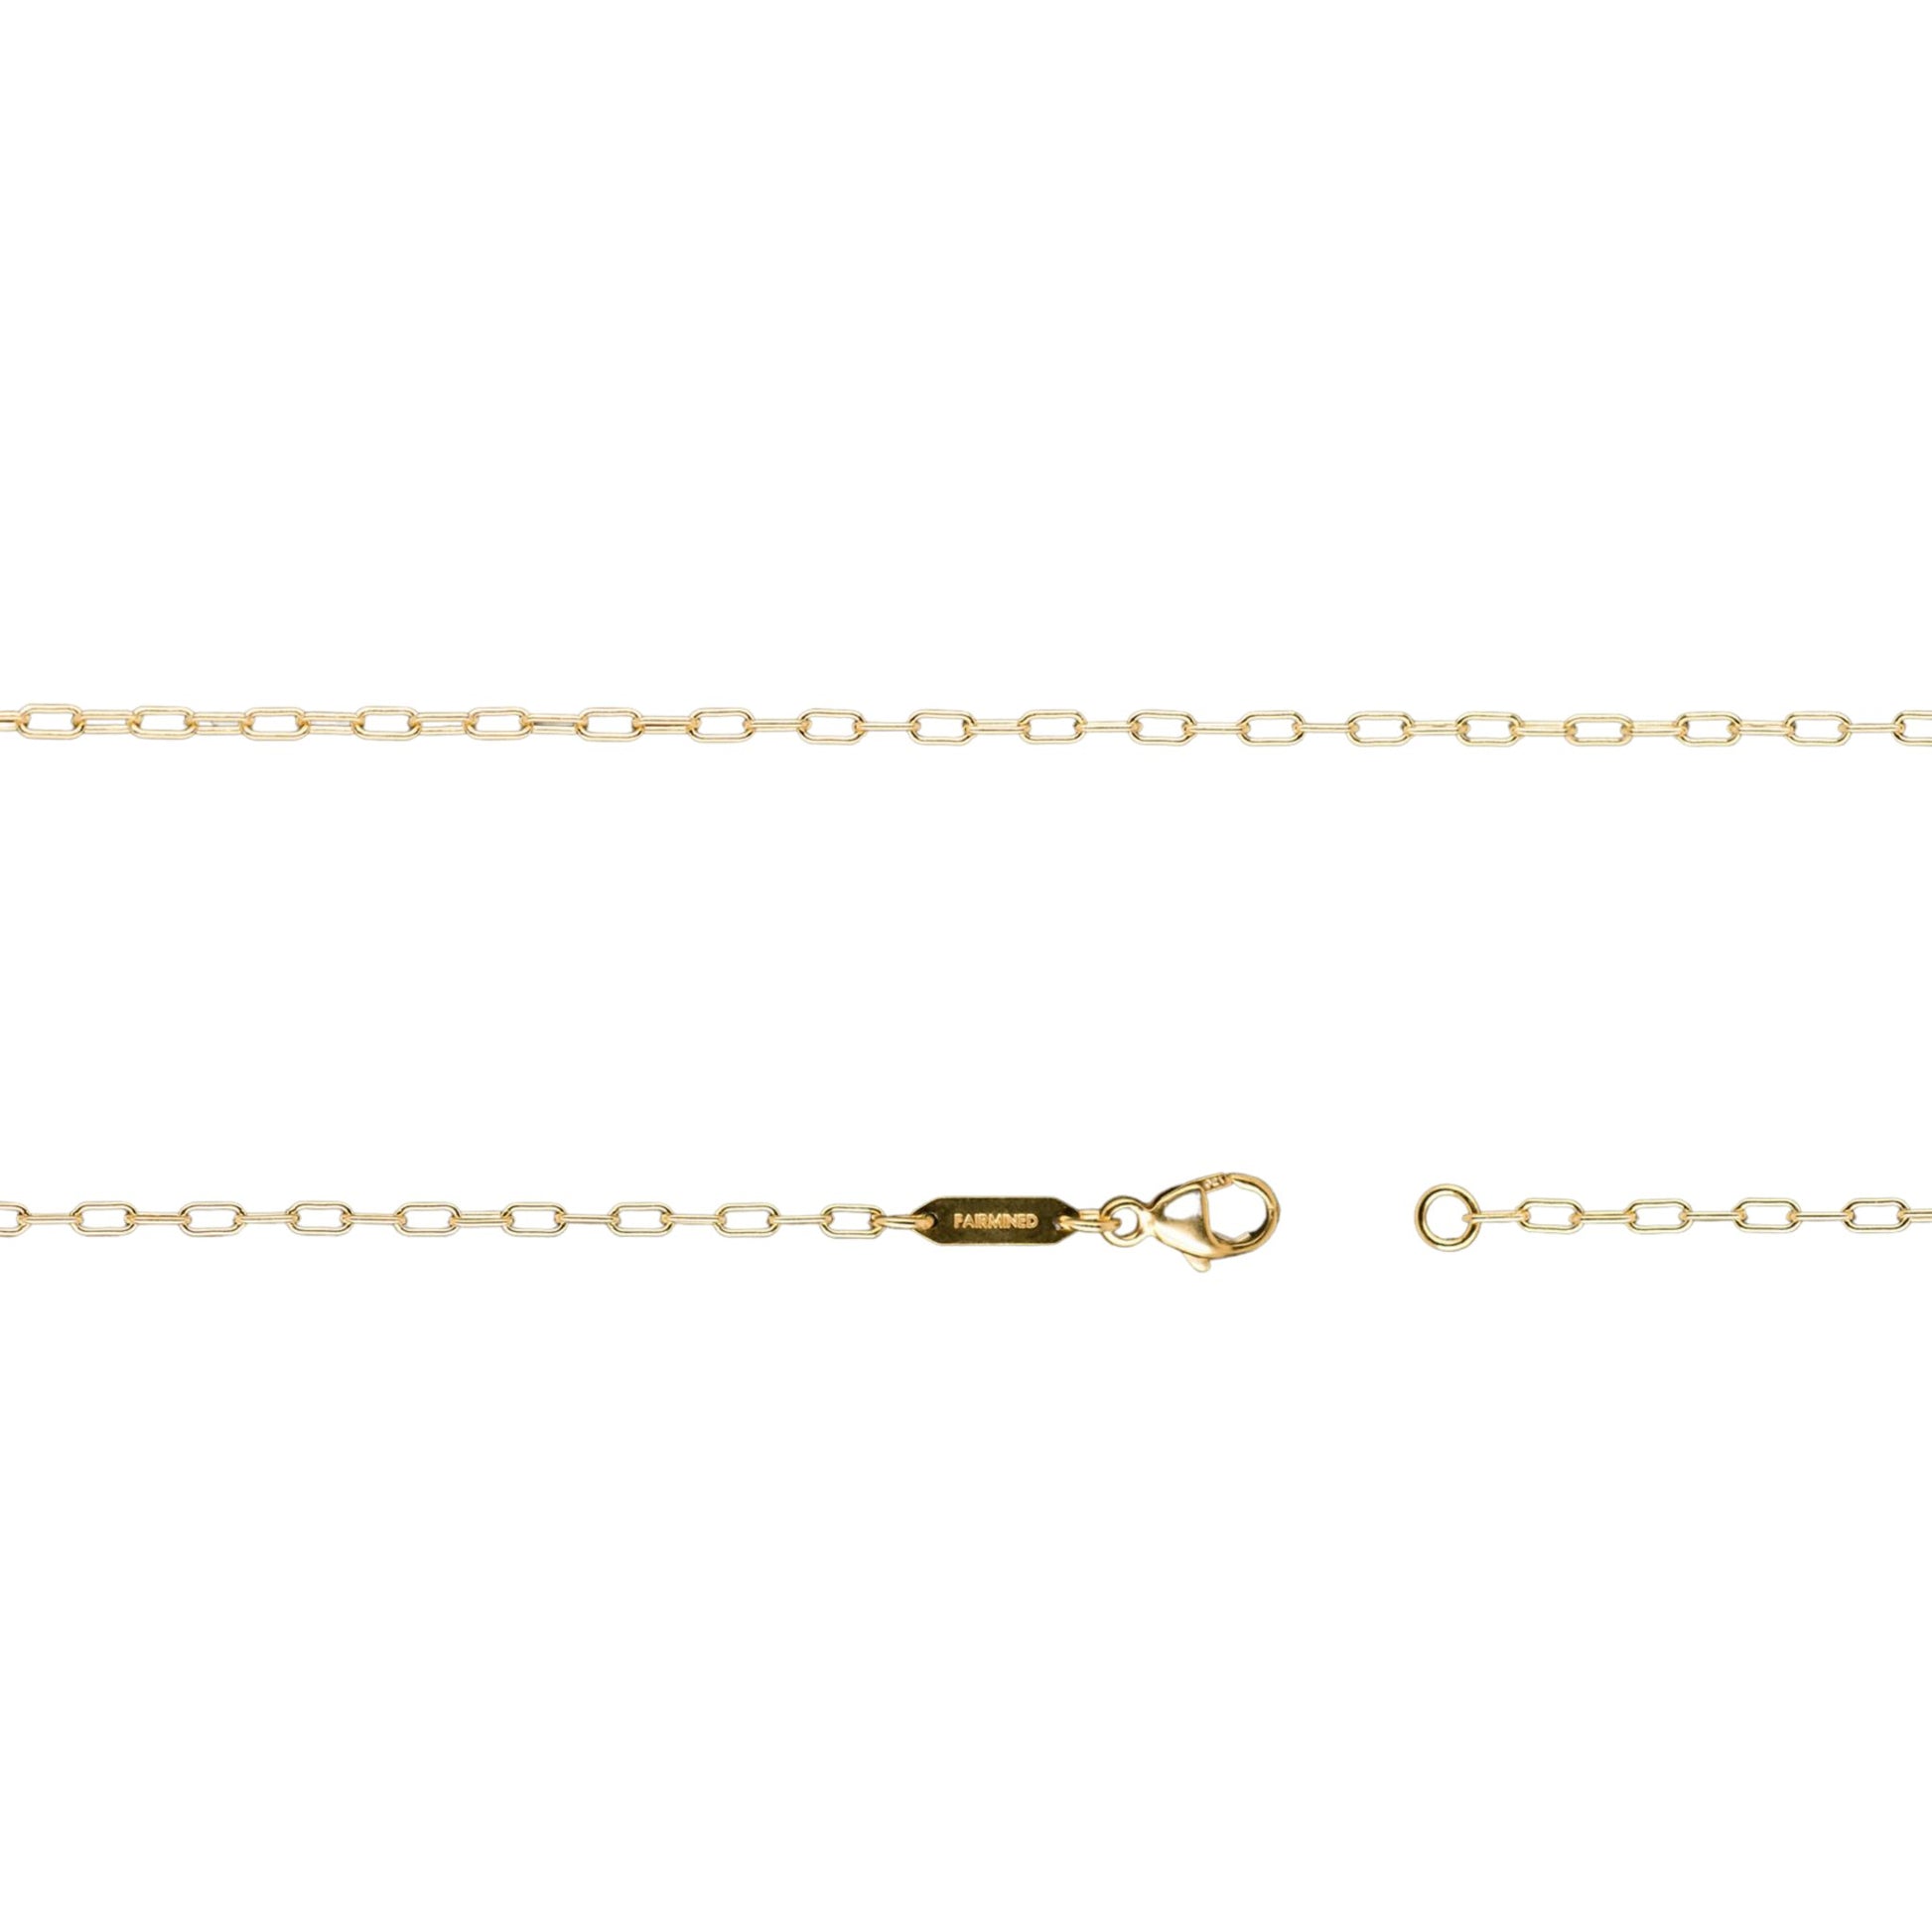 1.7mm x 3.5mm Rounded Paper Clip Chain in 14K Fairmined Gold - W.R. Metalarts